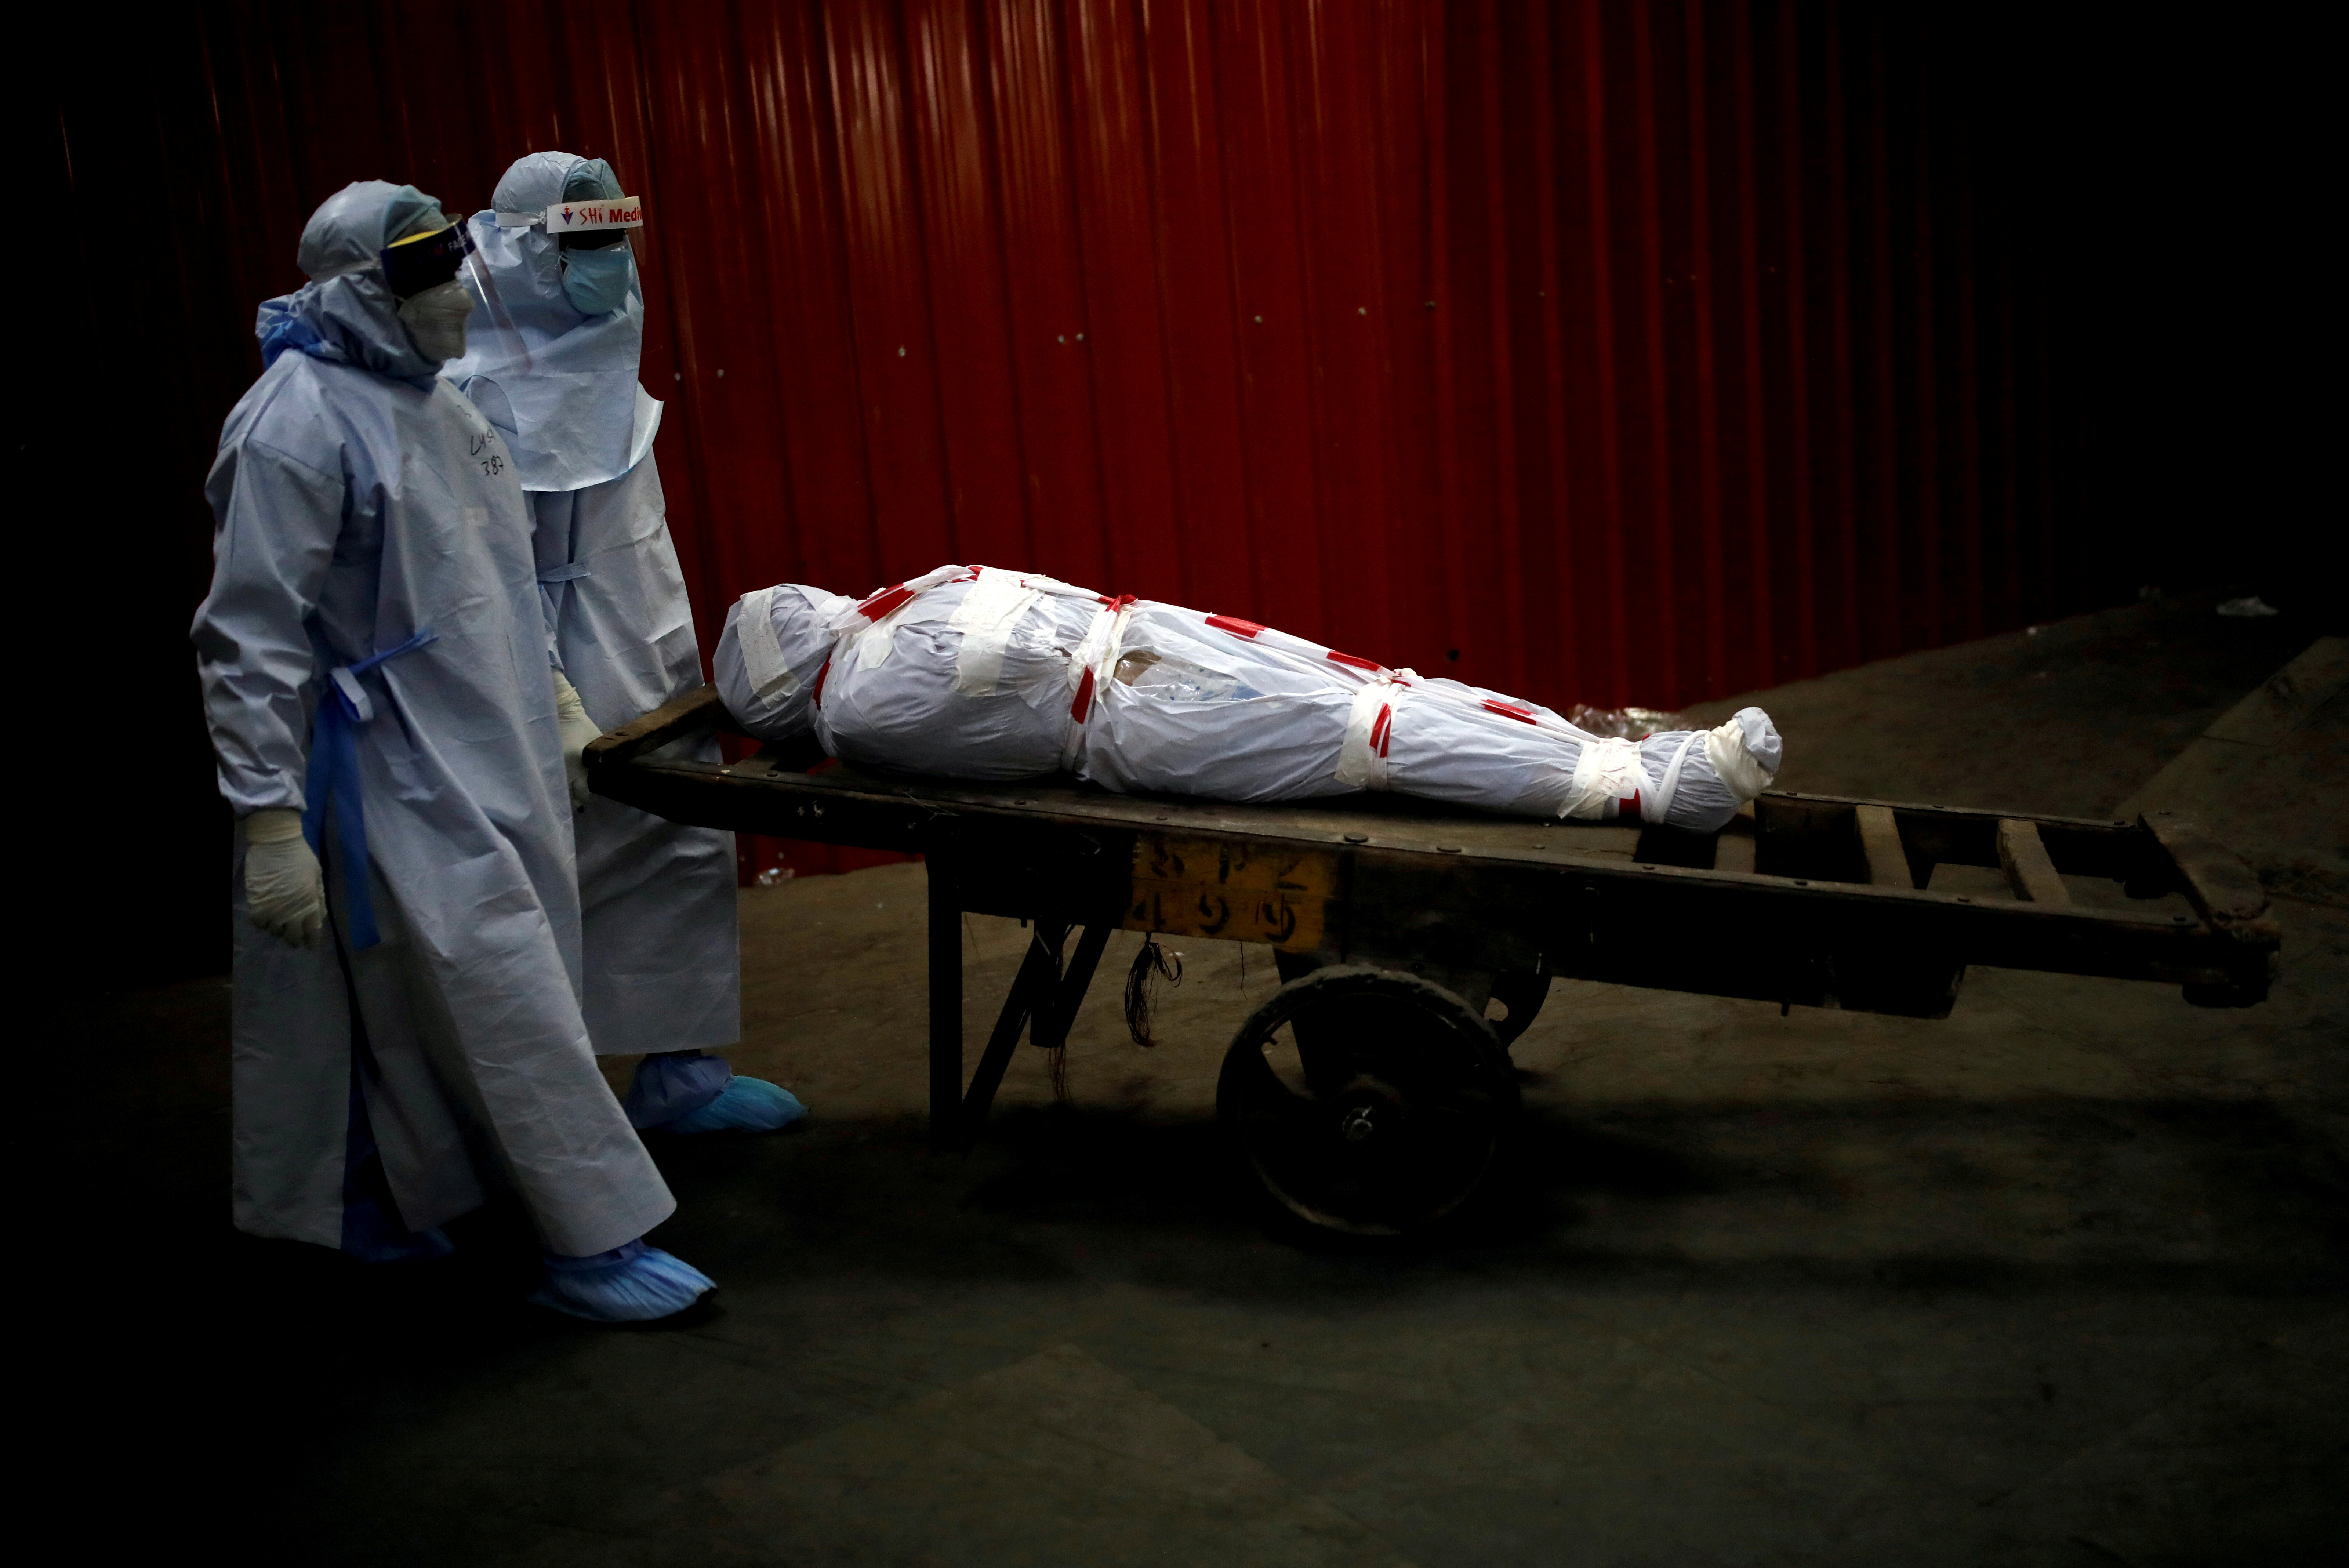 Health workers carry the body of a man who died due to the coronavirus disease in New Delhi